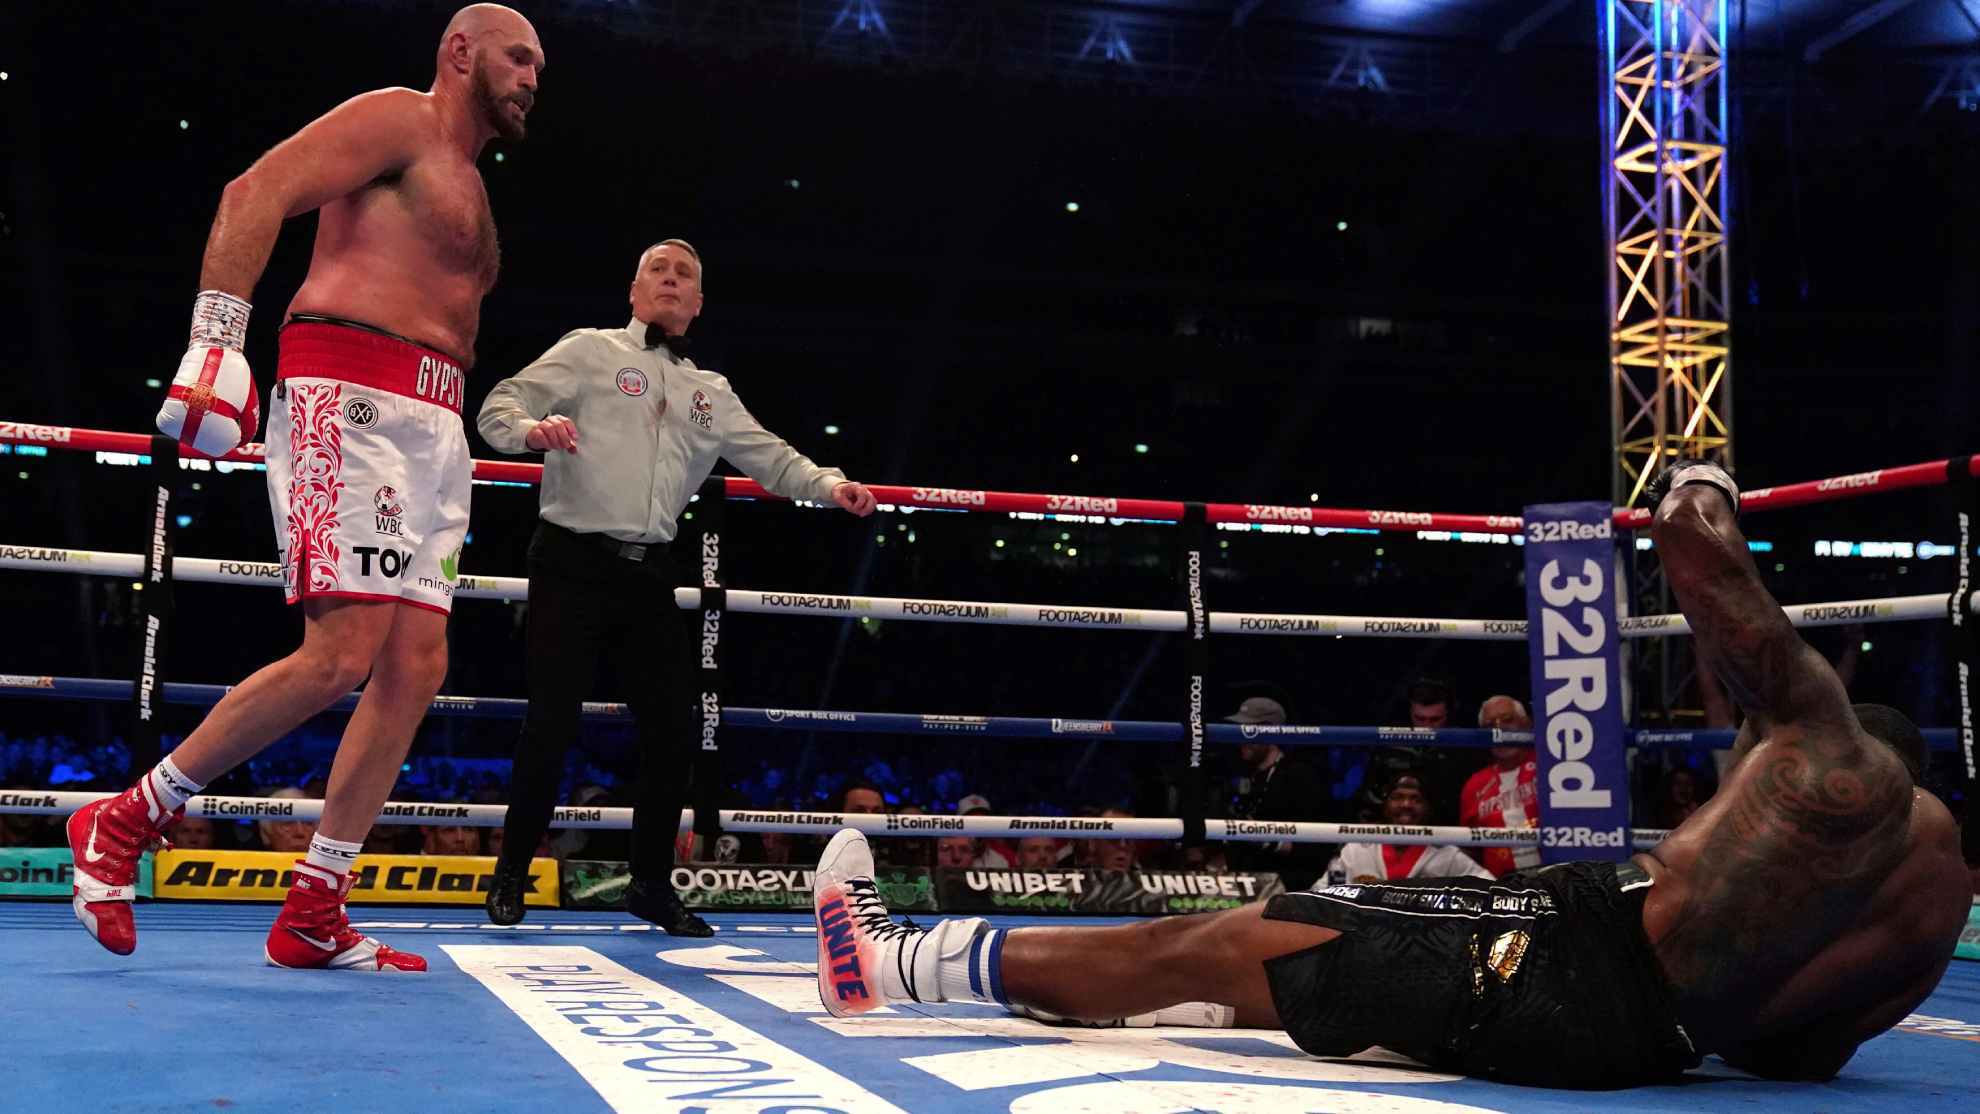 Fury knocked out Whyte.